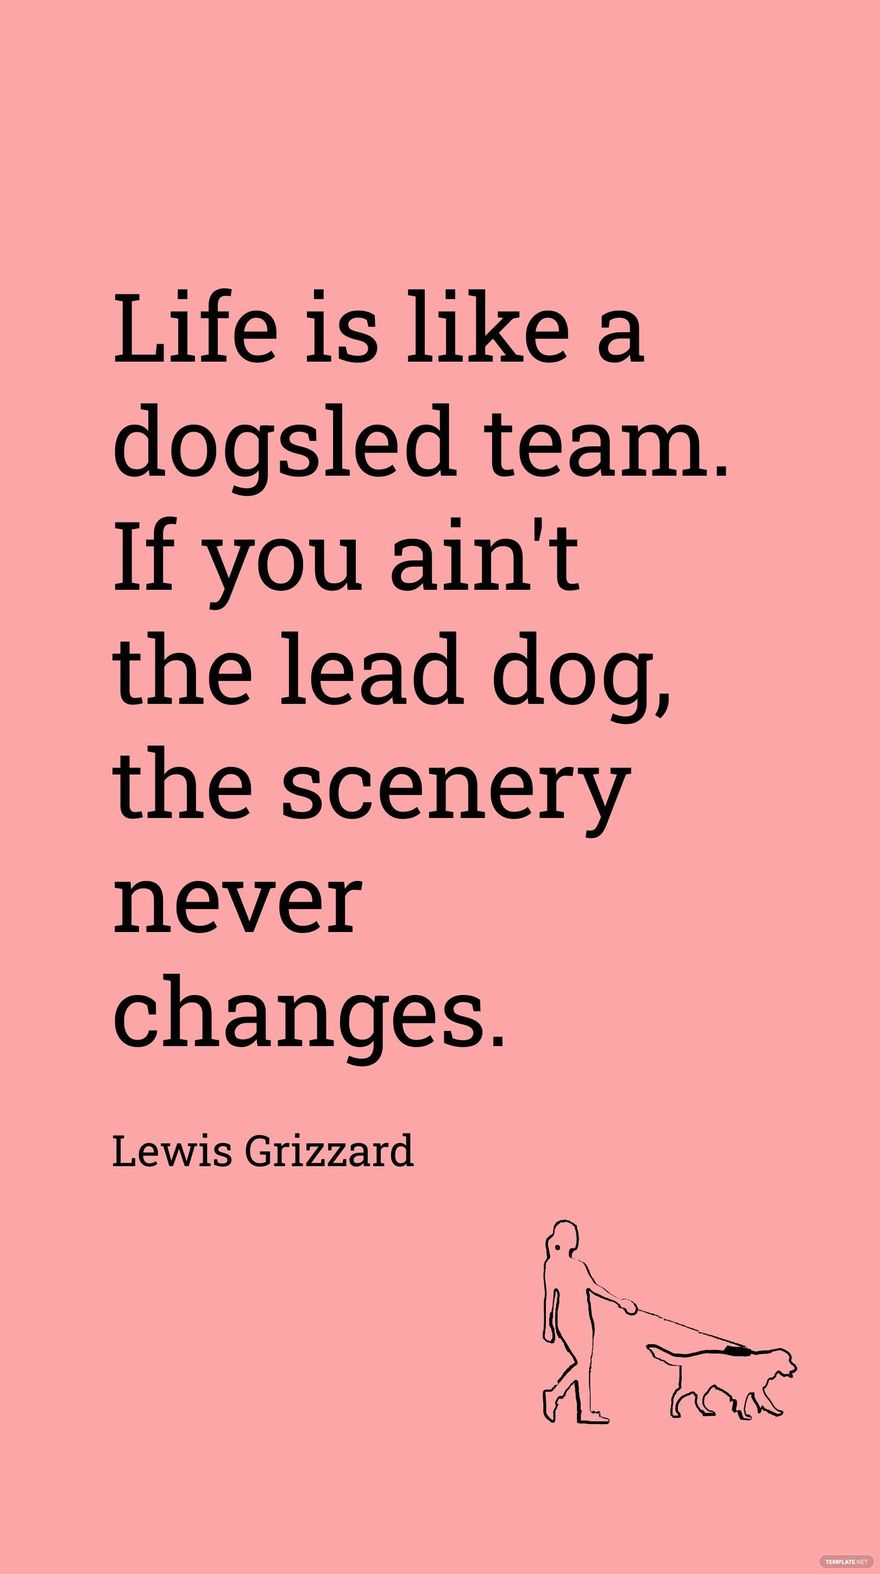 Free Lewis Grizzard - Life is like a dogsled team. If you ain't the lead dog, the scenery never changes. in JPG